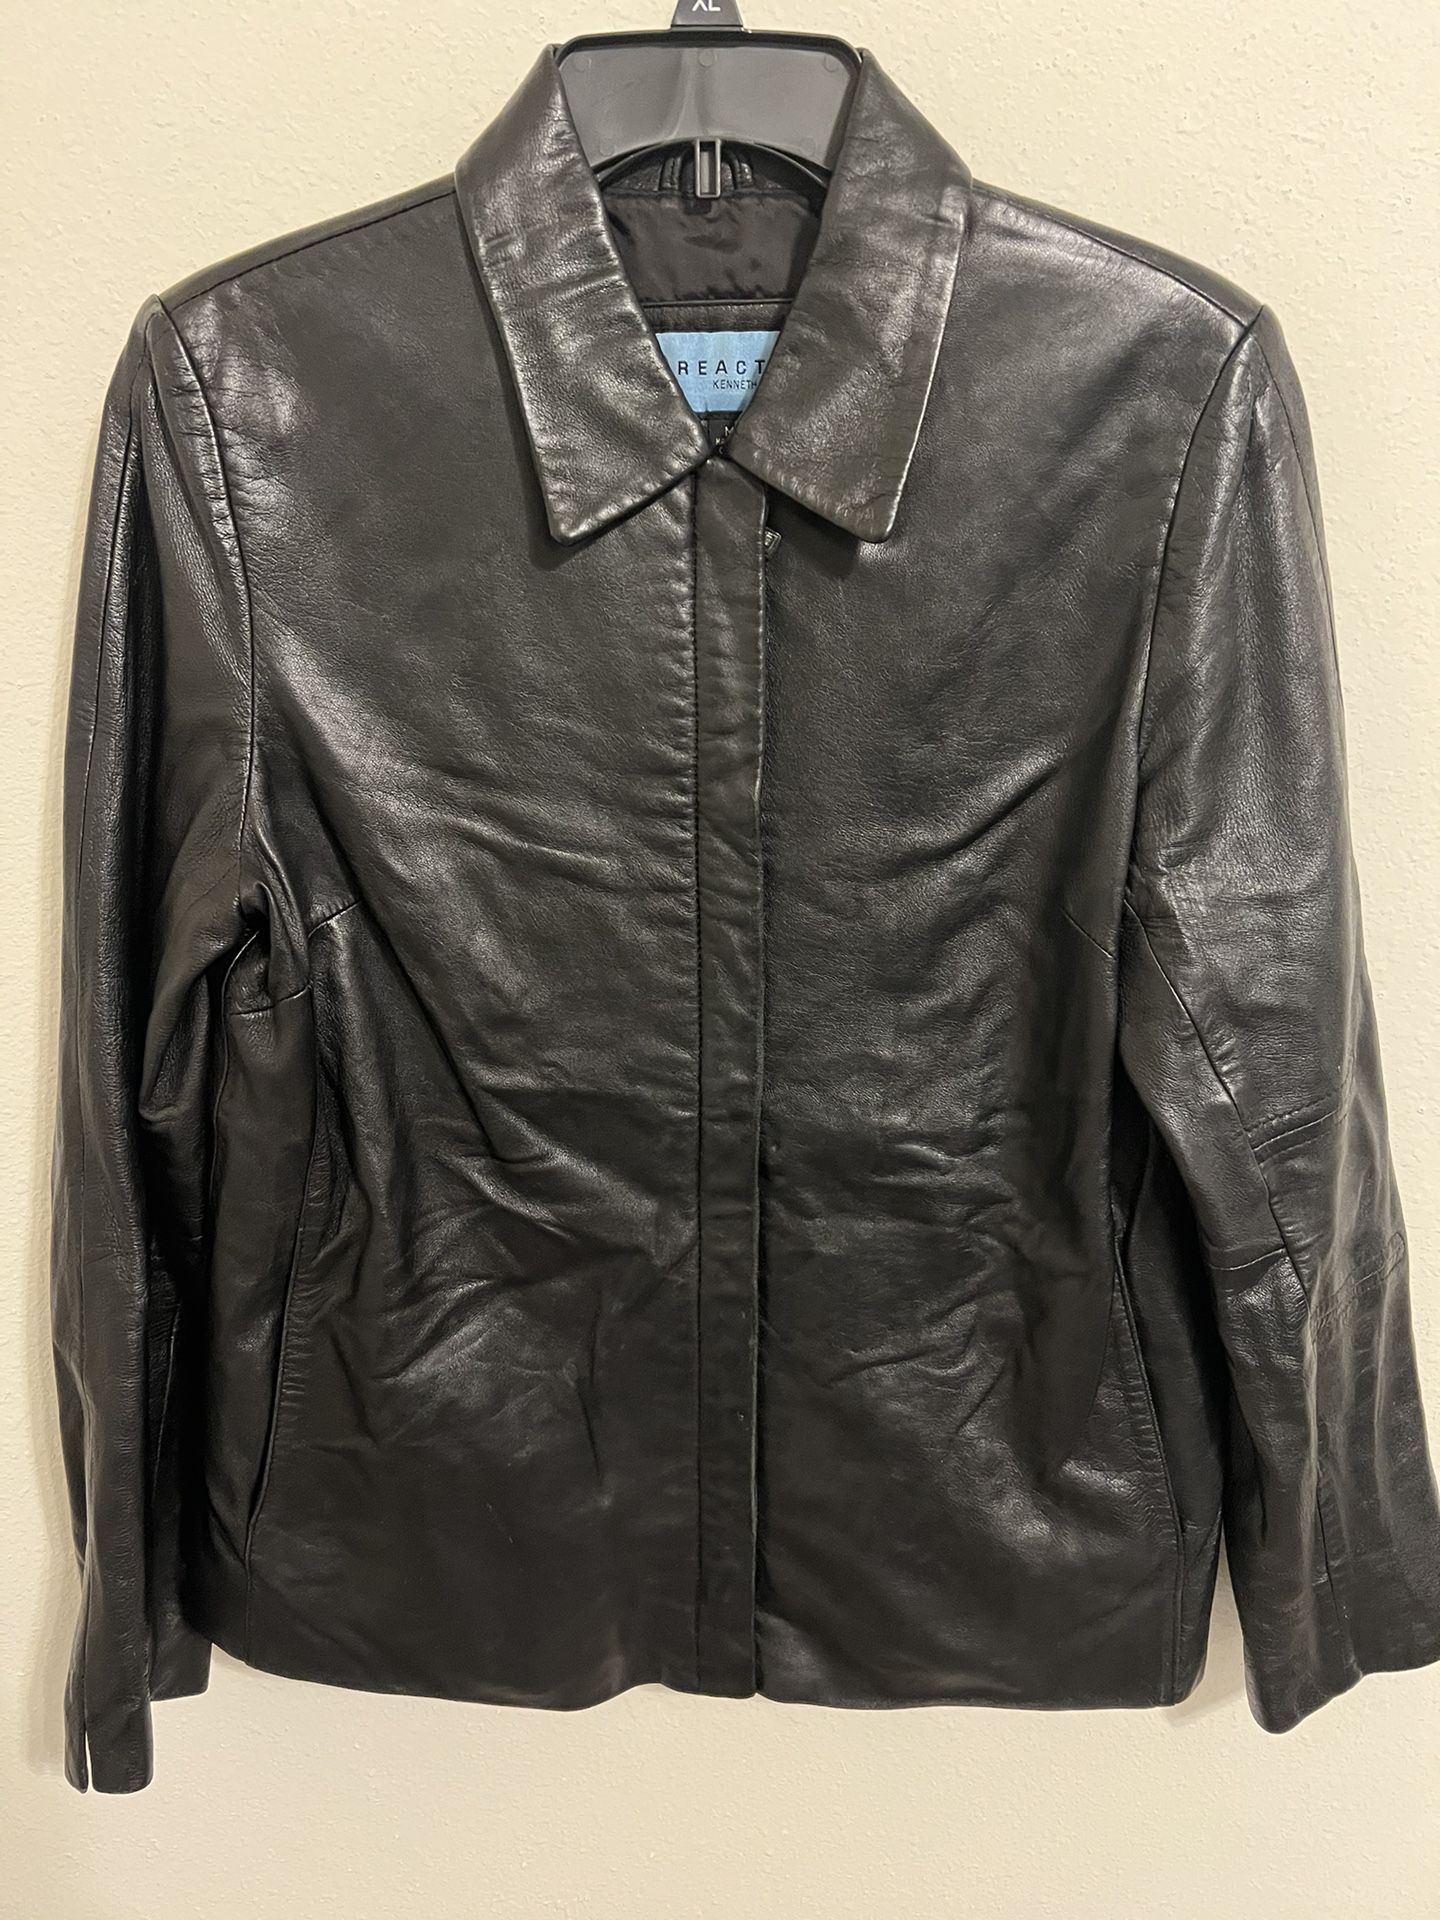 Kenneth Cole Reaction Leather Jacket 